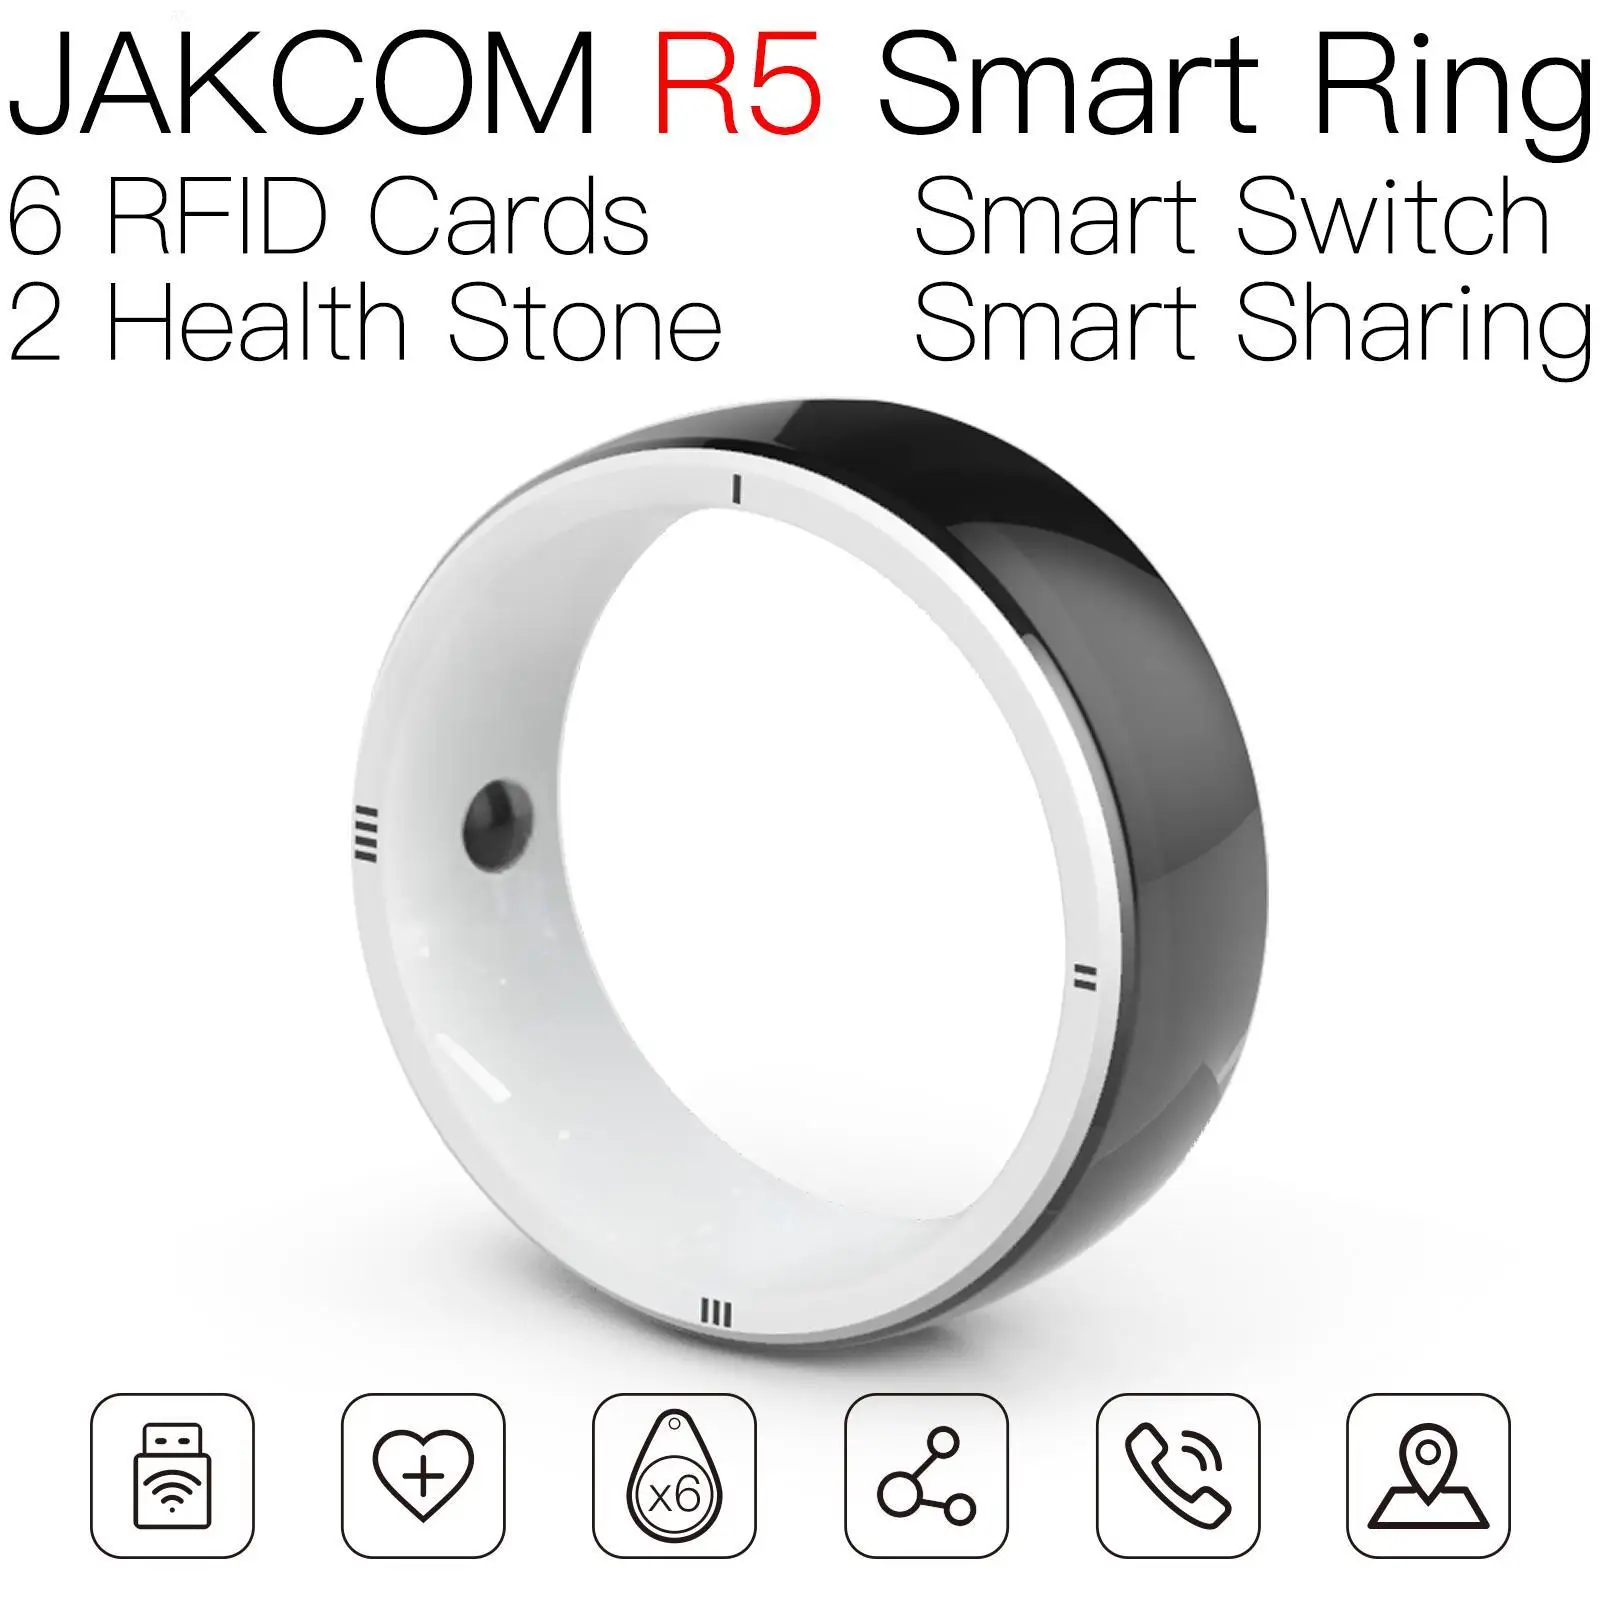 

JAKCOM R5 Smart Ring Nice than syringes with needle pigeon chip nfc card gold t5577 199 rfid smart watch stick 125 uhf dual hf